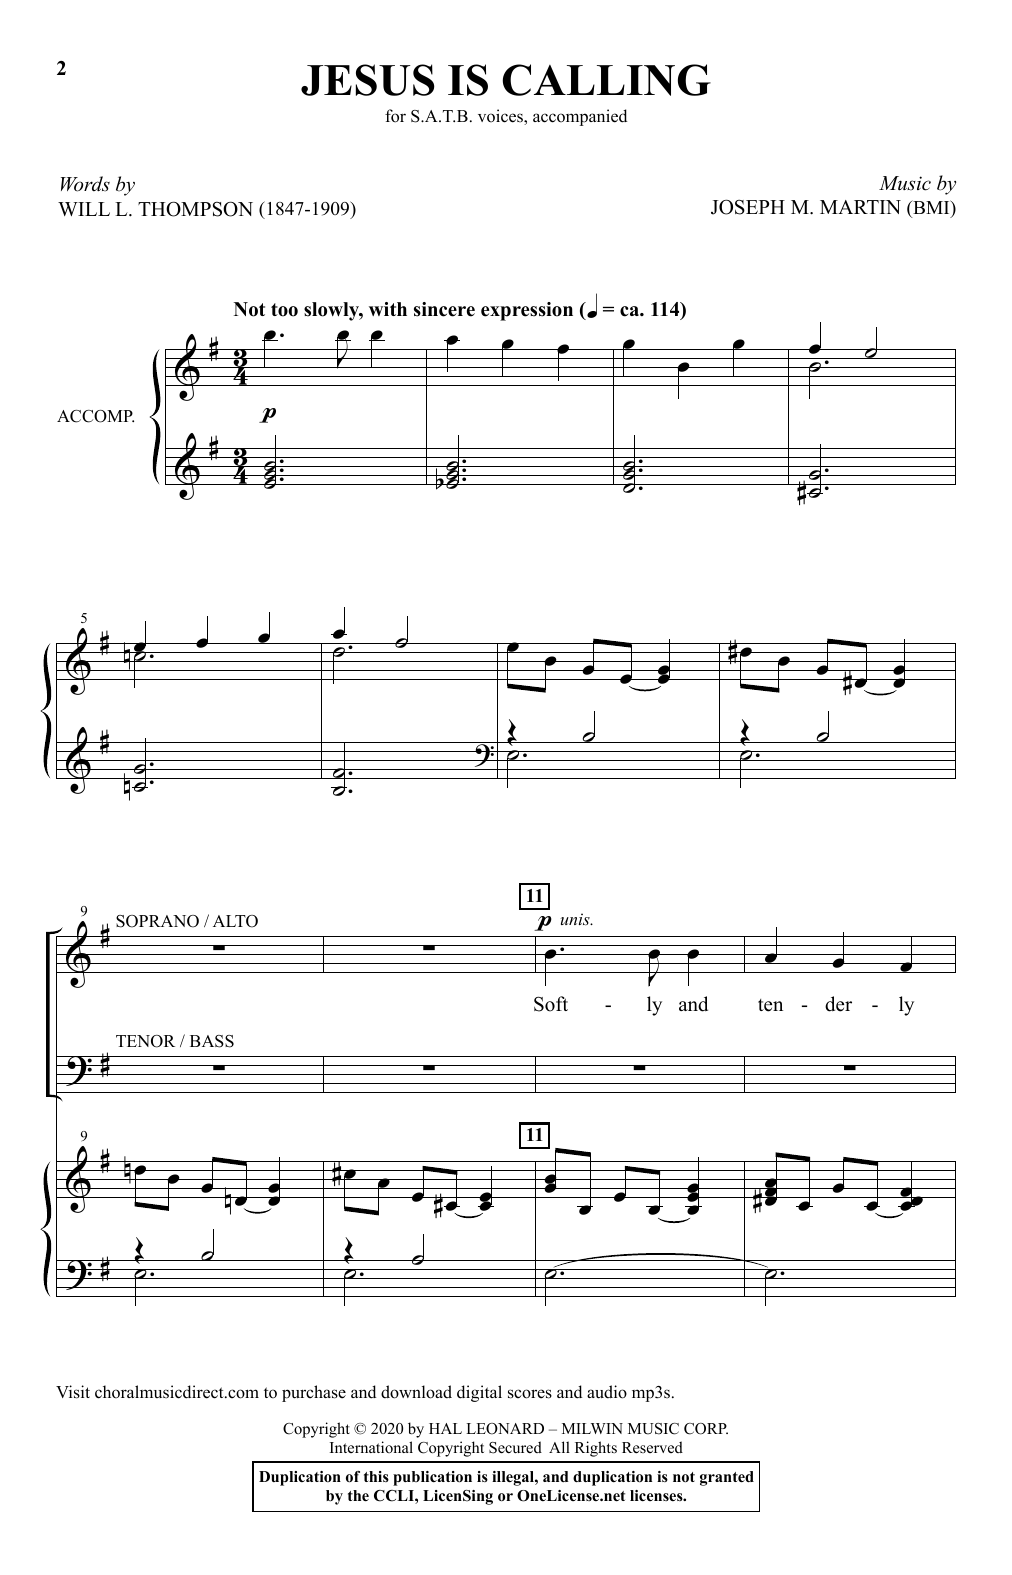 Download Will L. Thompson and Joseph M. Marti Jesus Is Calling Sheet Music